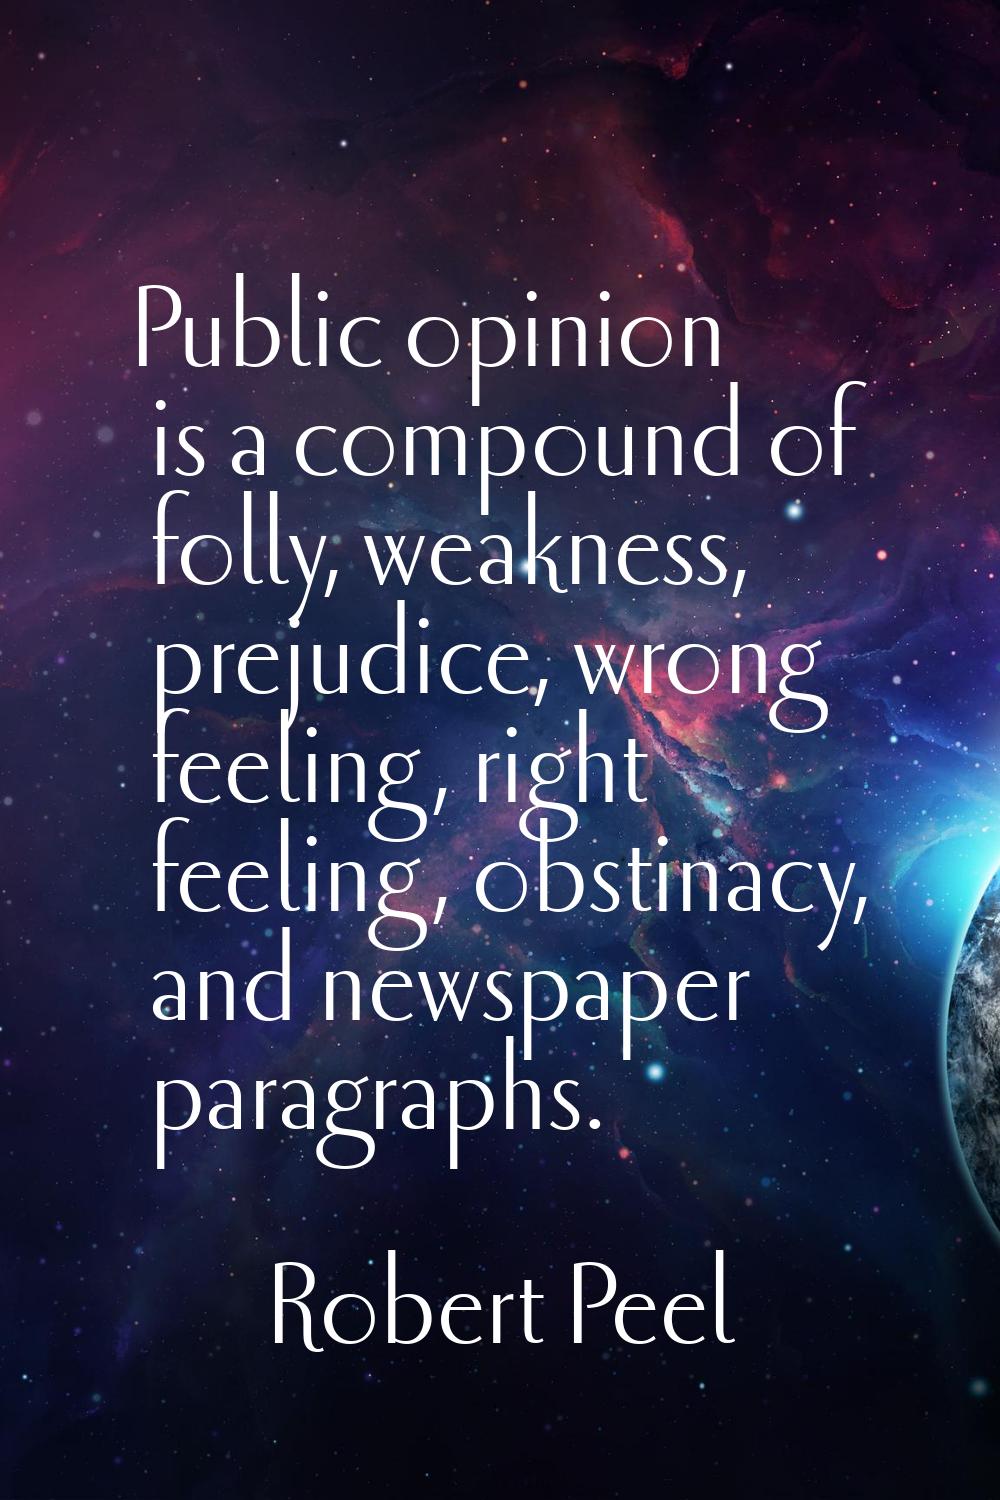 Public opinion is a compound of folly, weakness, prejudice, wrong feeling, right feeling, obstinacy